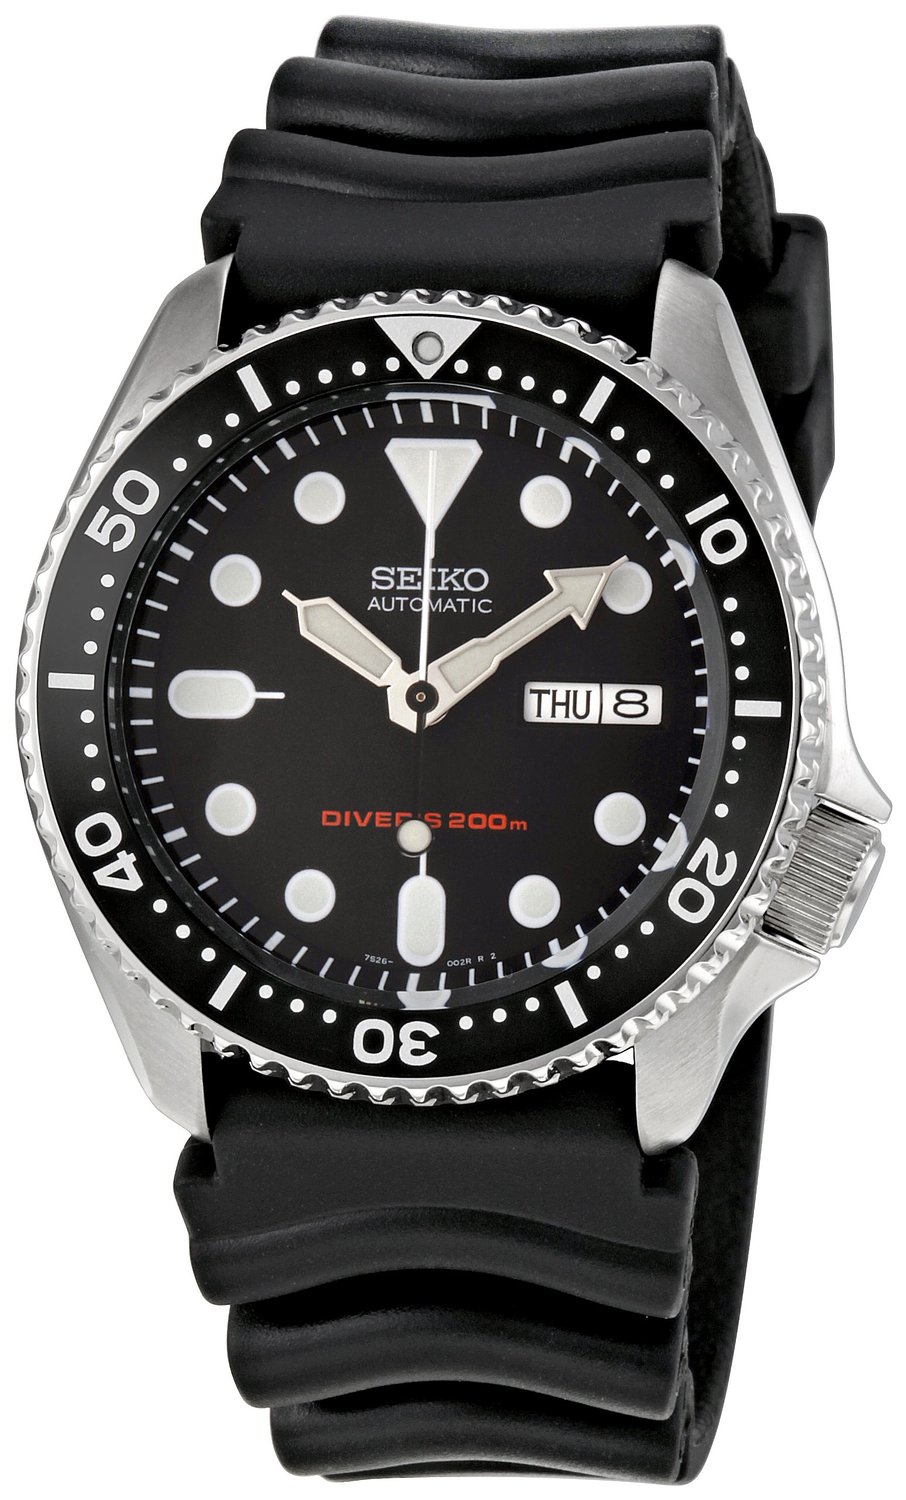 SEIKO SKX007 Review - Is It Good? - The Watch Blog